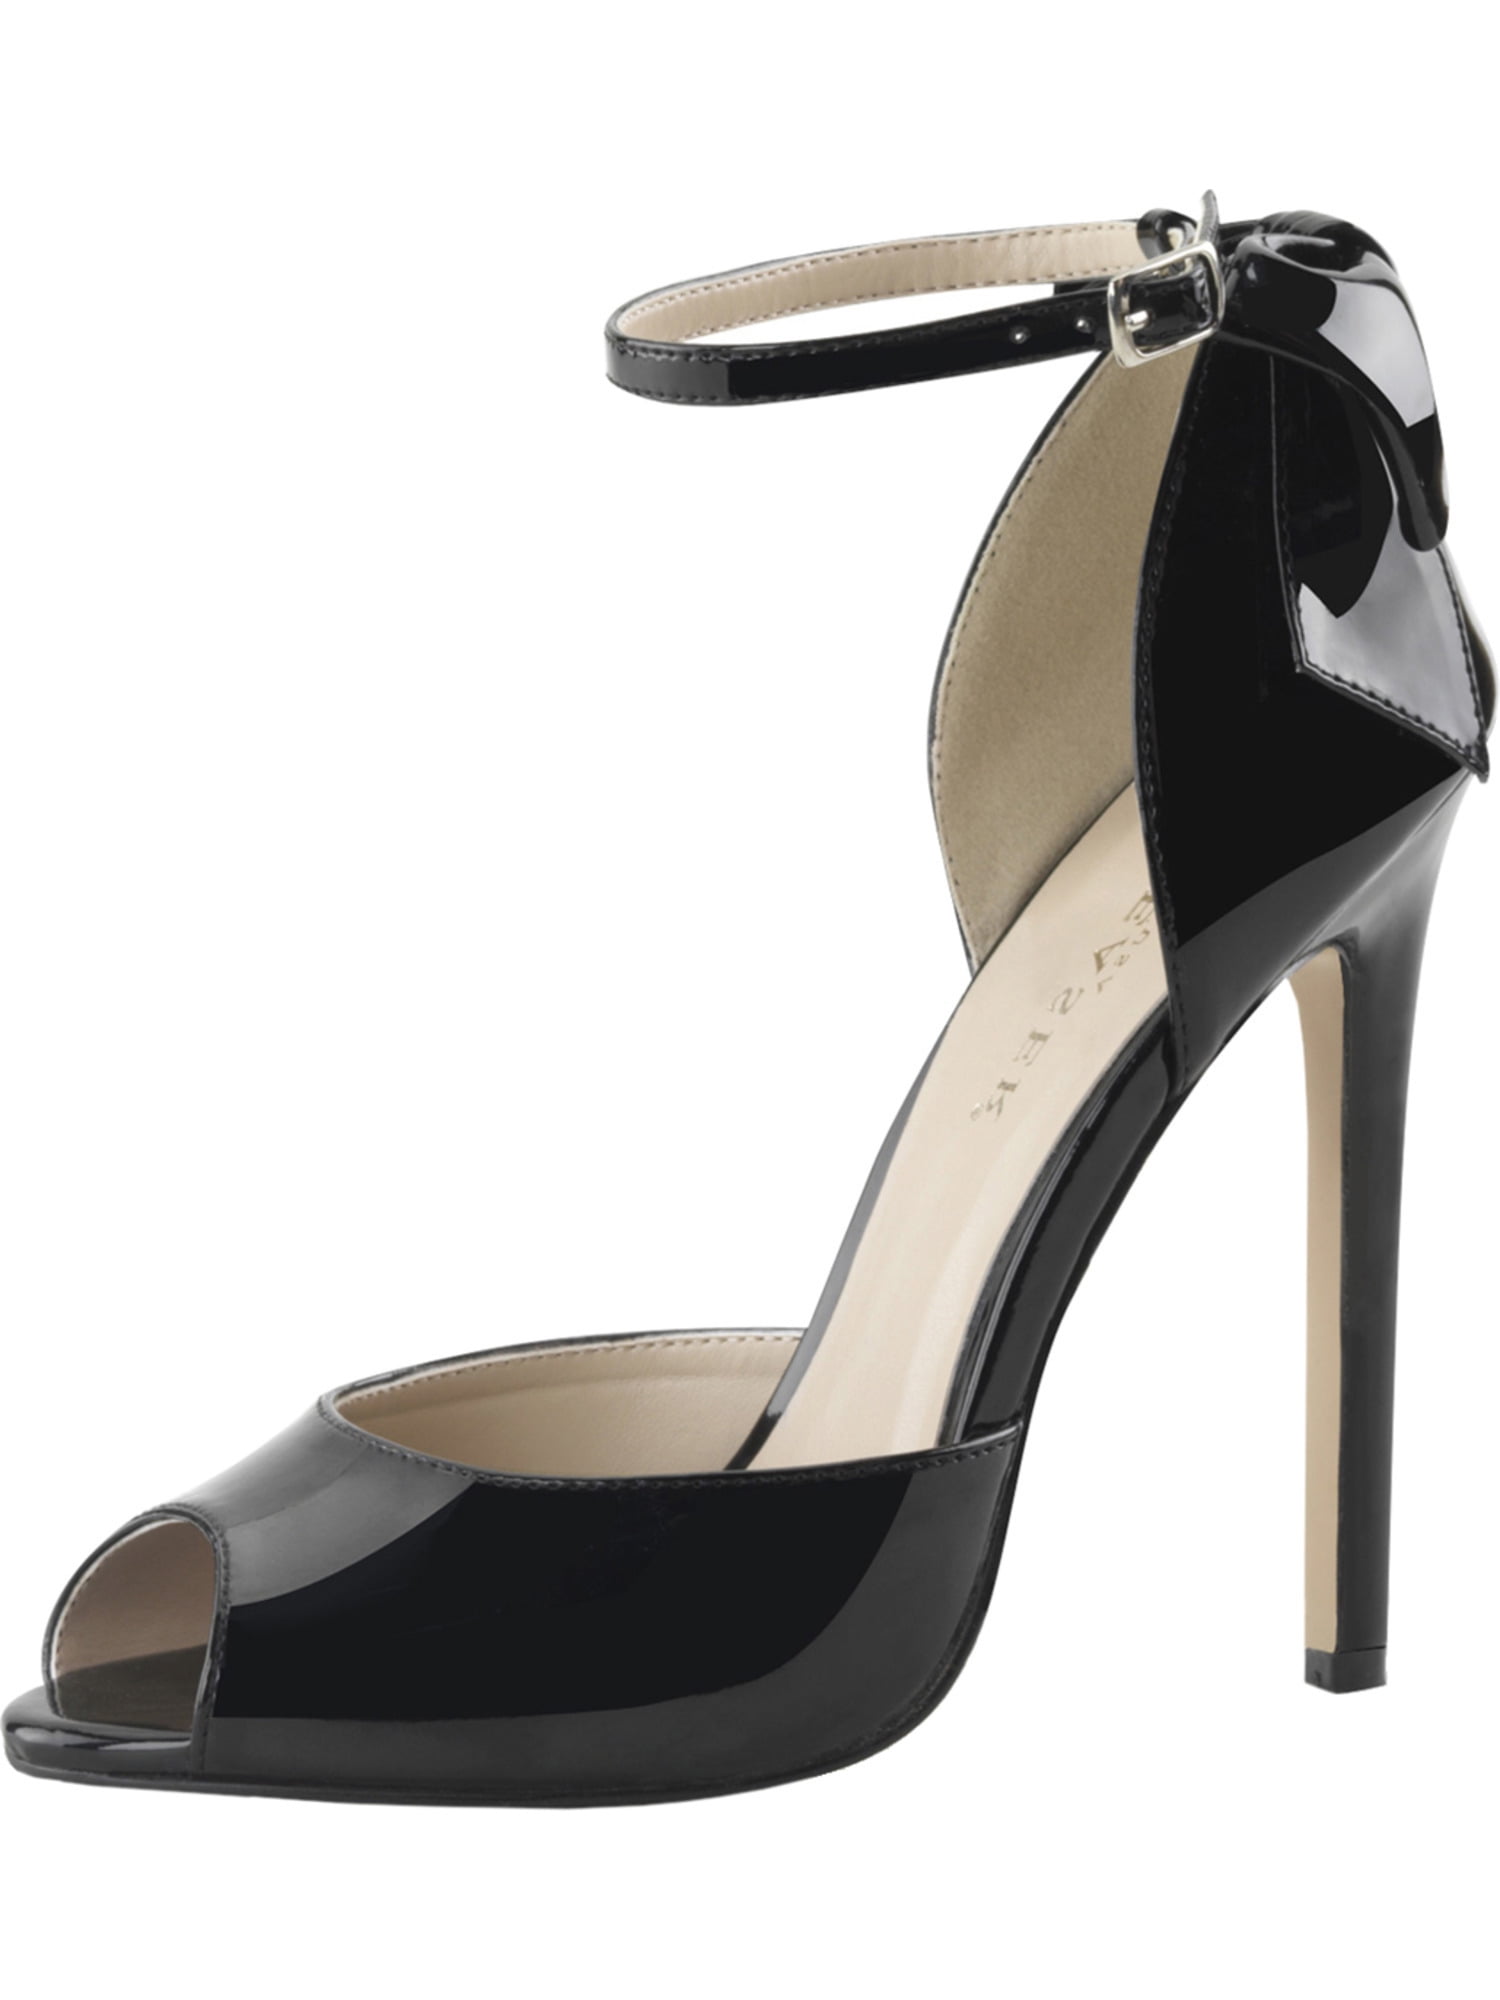 Pleaser - Womens Black Heels With Ankle Strap Peep Toe Pumps Dorsay ...